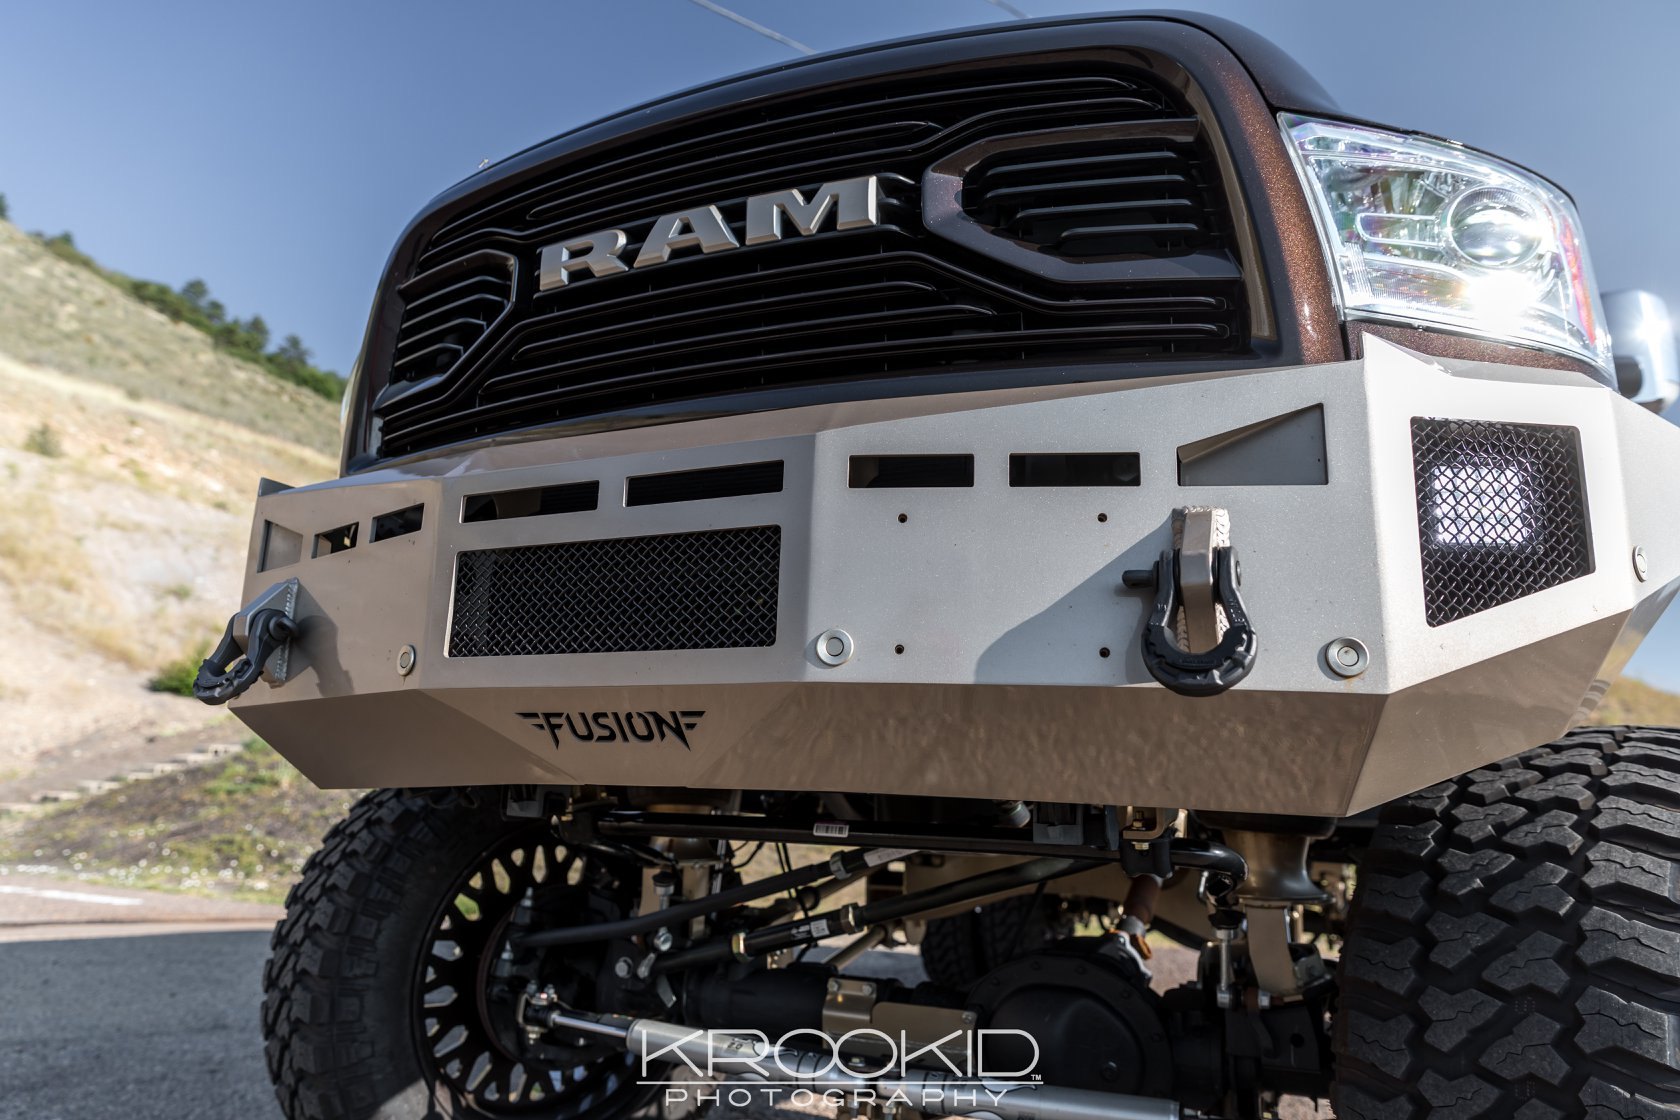 Brown Lifted Dodge Ram with Fusion Front Bumper - Photo by Krookid Photography